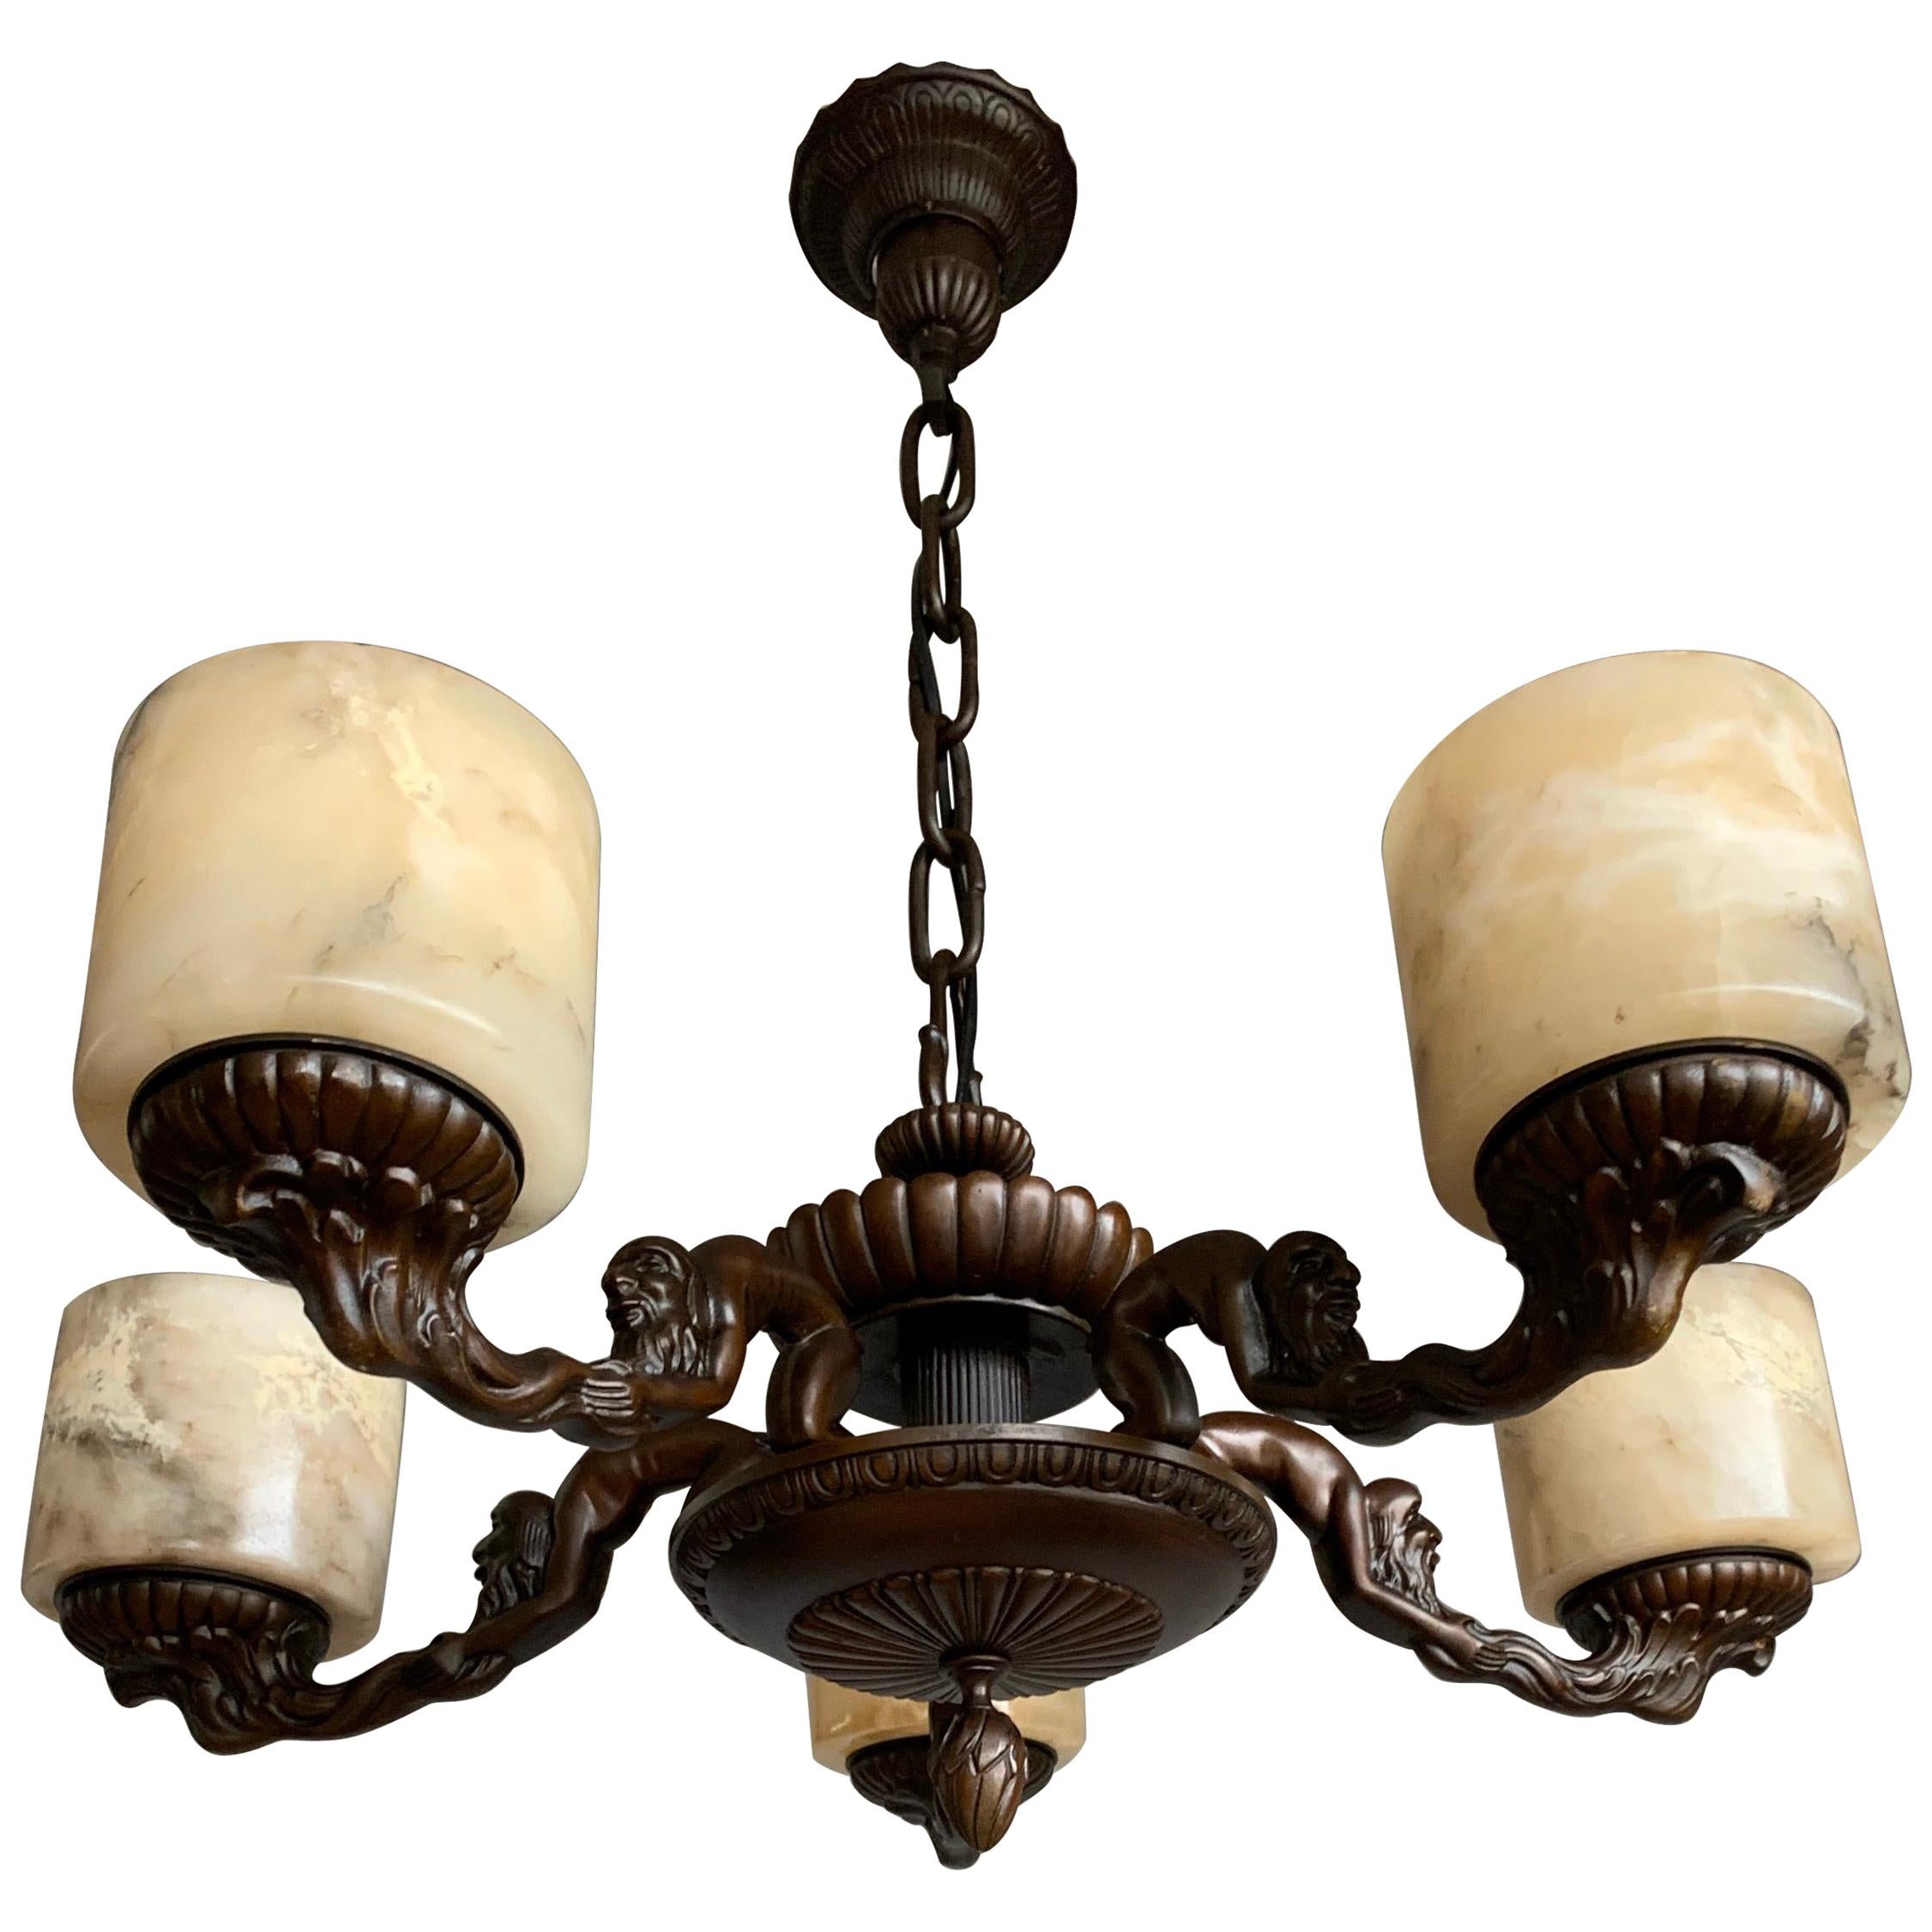 Unique Art Deco Alabaster and Bronze Chandelier with Wizard Like Sculptures For Sale